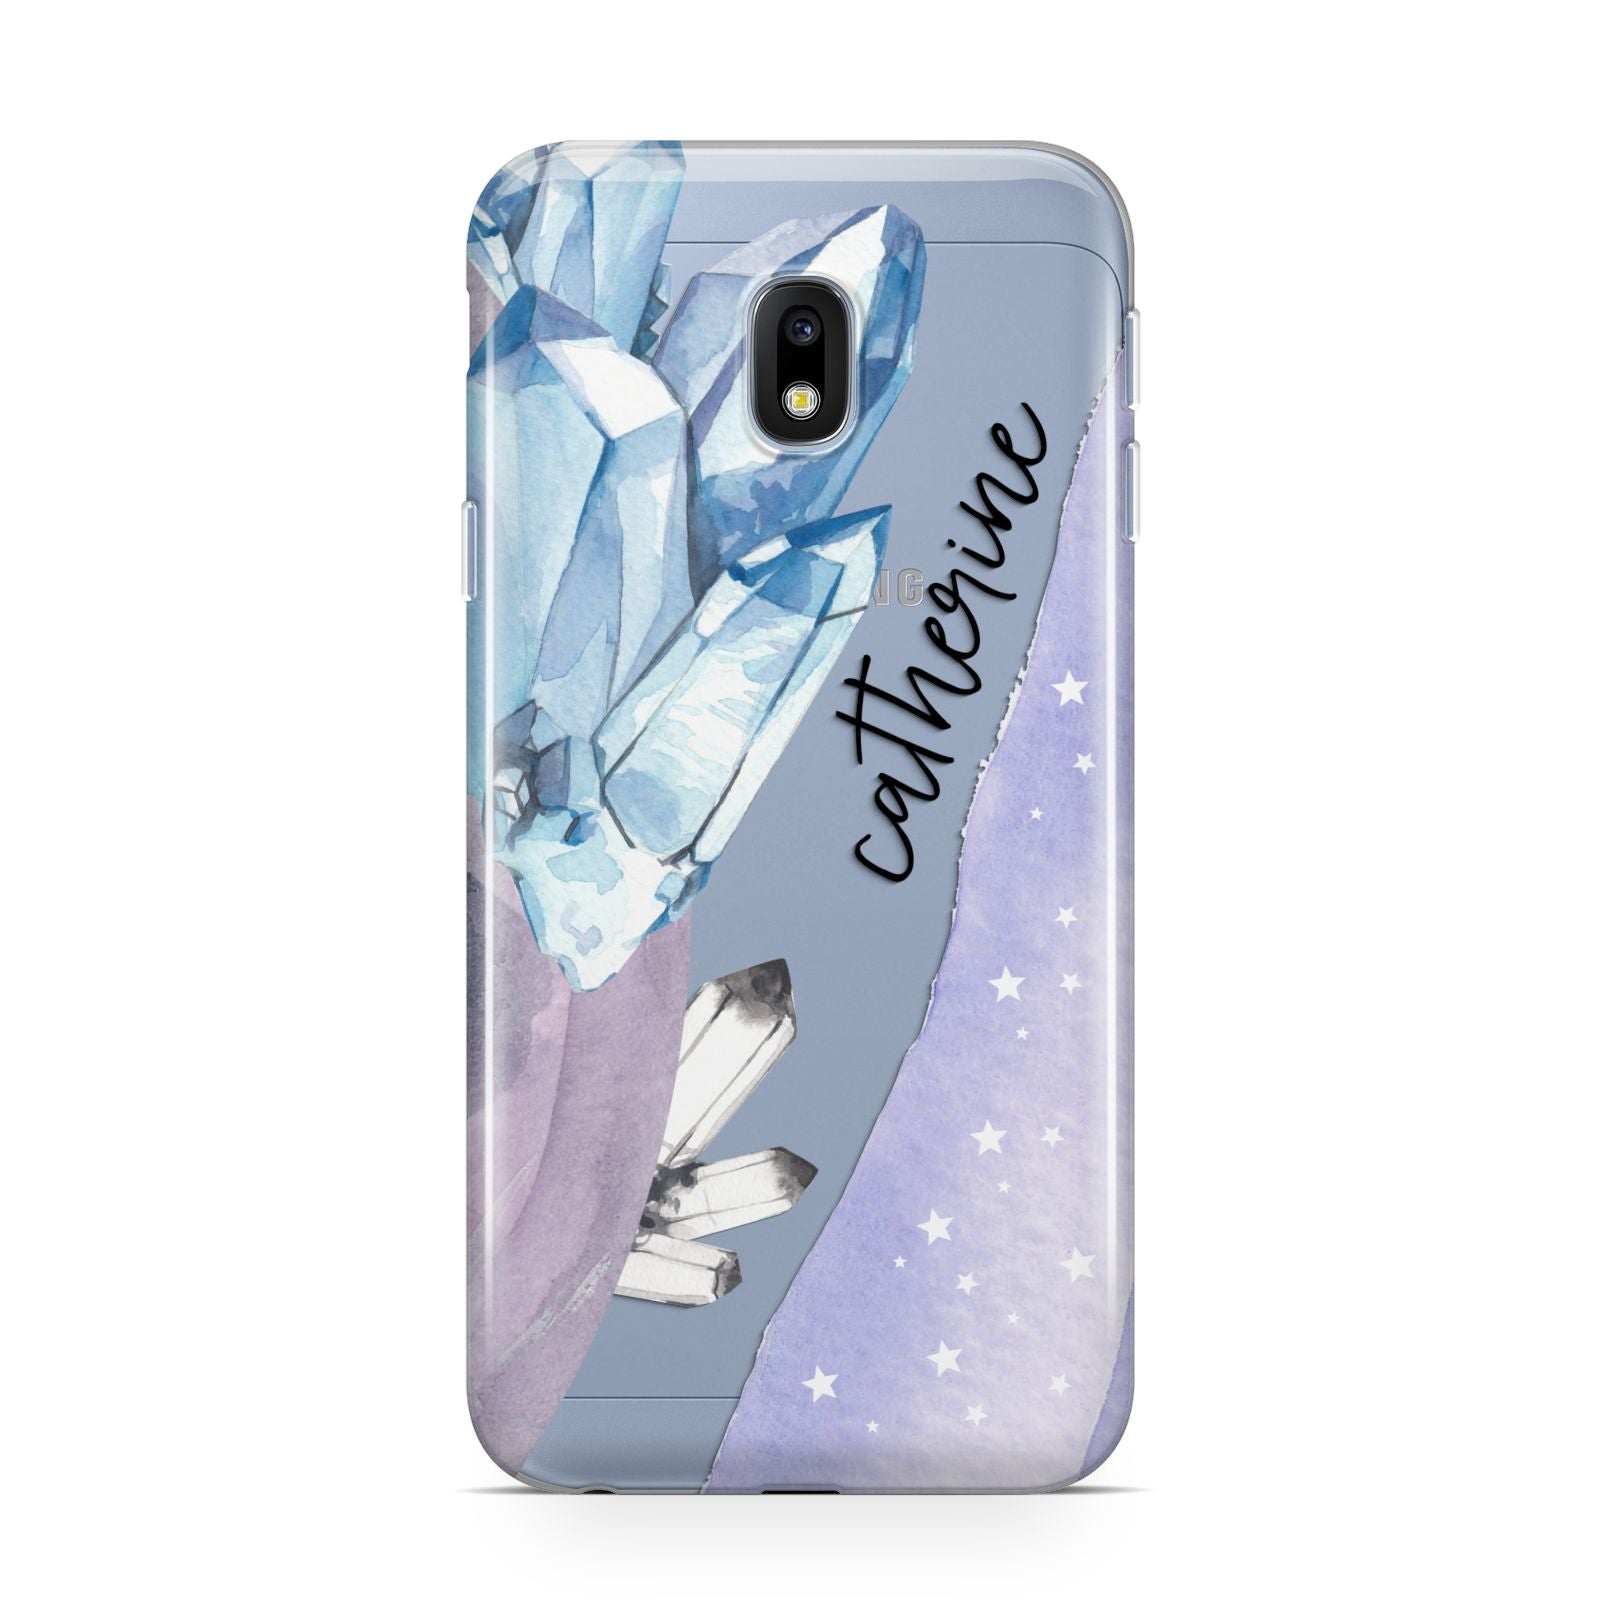 Crystals Personalised Name Samsung Galaxy J3 2017 Case